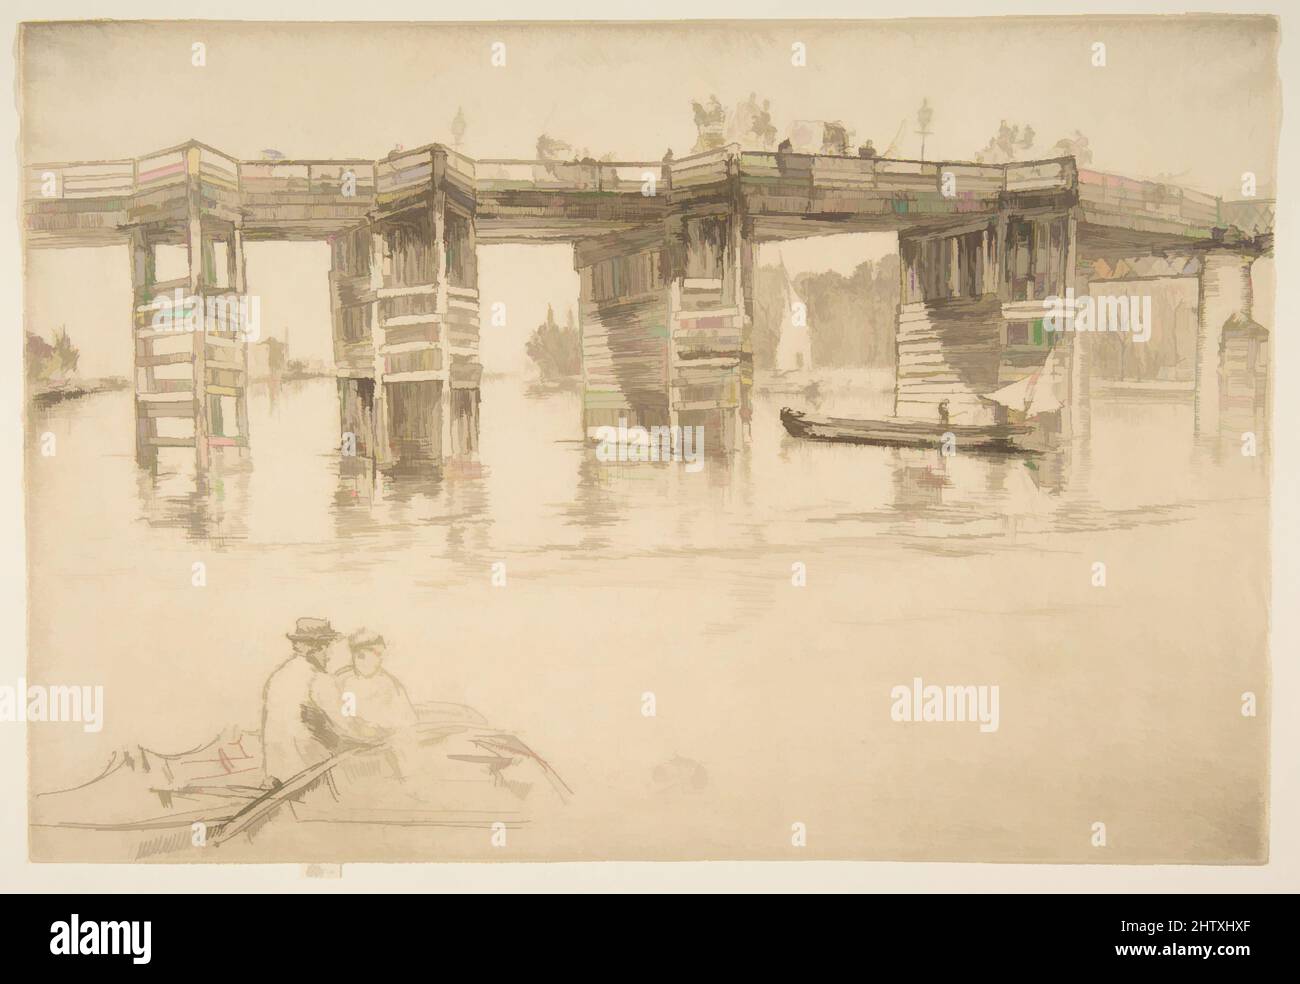 Art inspired by Old Putney Bridge, 1879, Etching and drypoint; seventh state of seven (Glasgow); printed in dark brown ink on ivory laid paper, Plate: 7 7/8 x 11 5/8 in. (20 x 29.5 cm), Prints, James McNeill Whistler (American, Lowell, Massachusetts 1834–1903 London, Classic works modernized by Artotop with a splash of modernity. Shapes, color and value, eye-catching visual impact on art. Emotions through freedom of artworks in a contemporary way. A timeless message pursuing a wildly creative new direction. Artists turning to the digital medium and creating the Artotop NFT Stock Photo